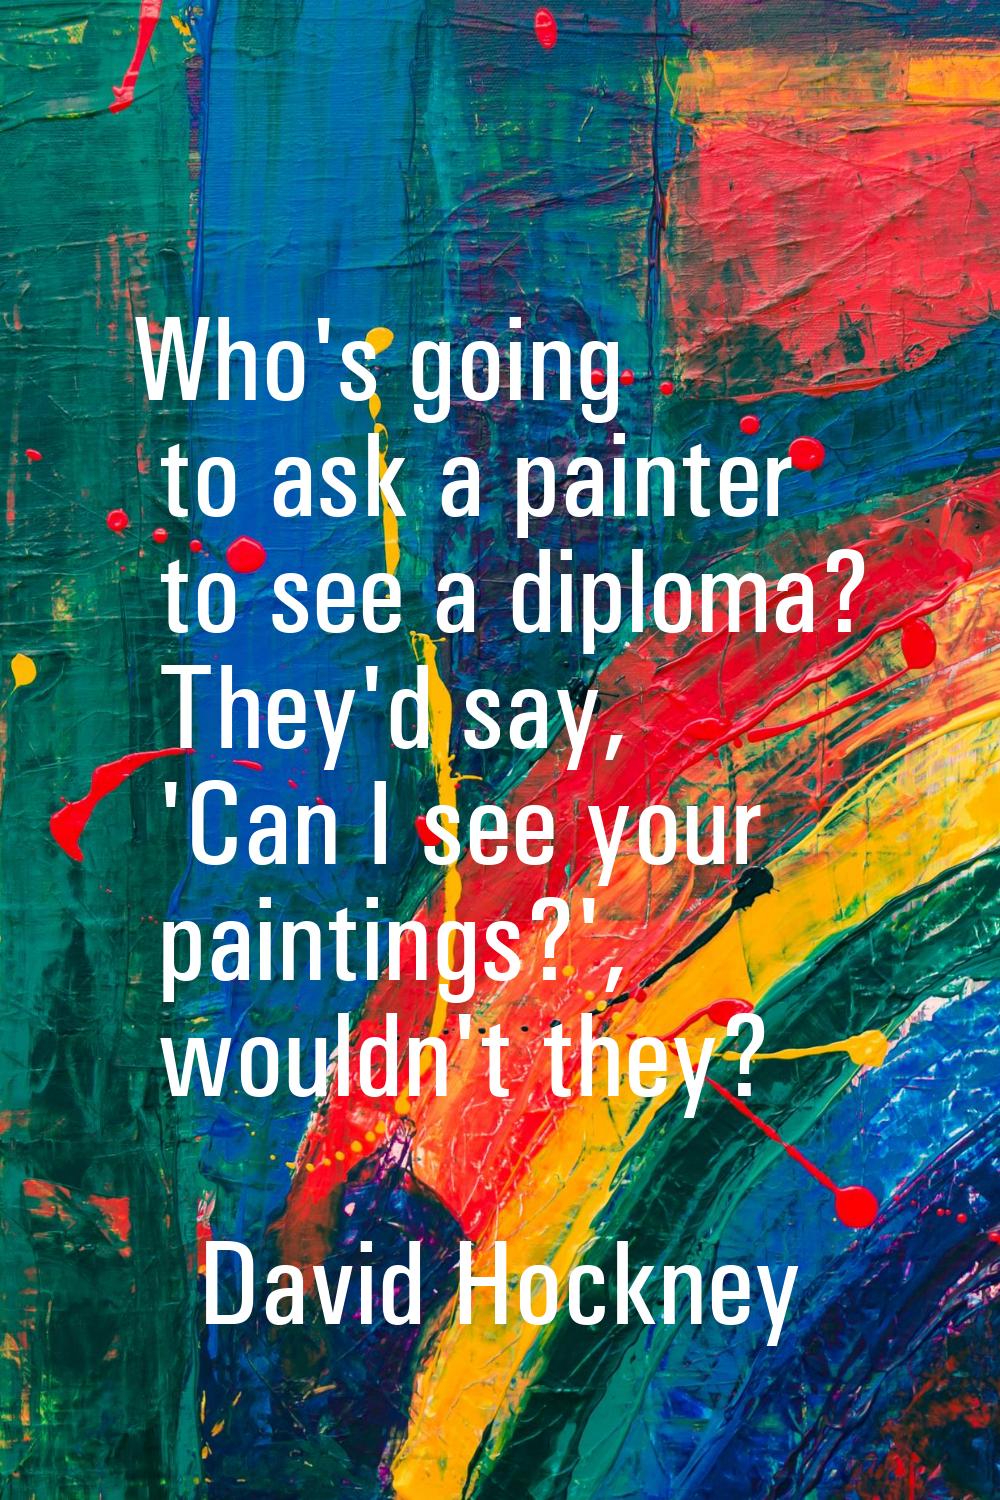 Who's going to ask a painter to see a diploma? They'd say, 'Can I see your paintings?', wouldn't th